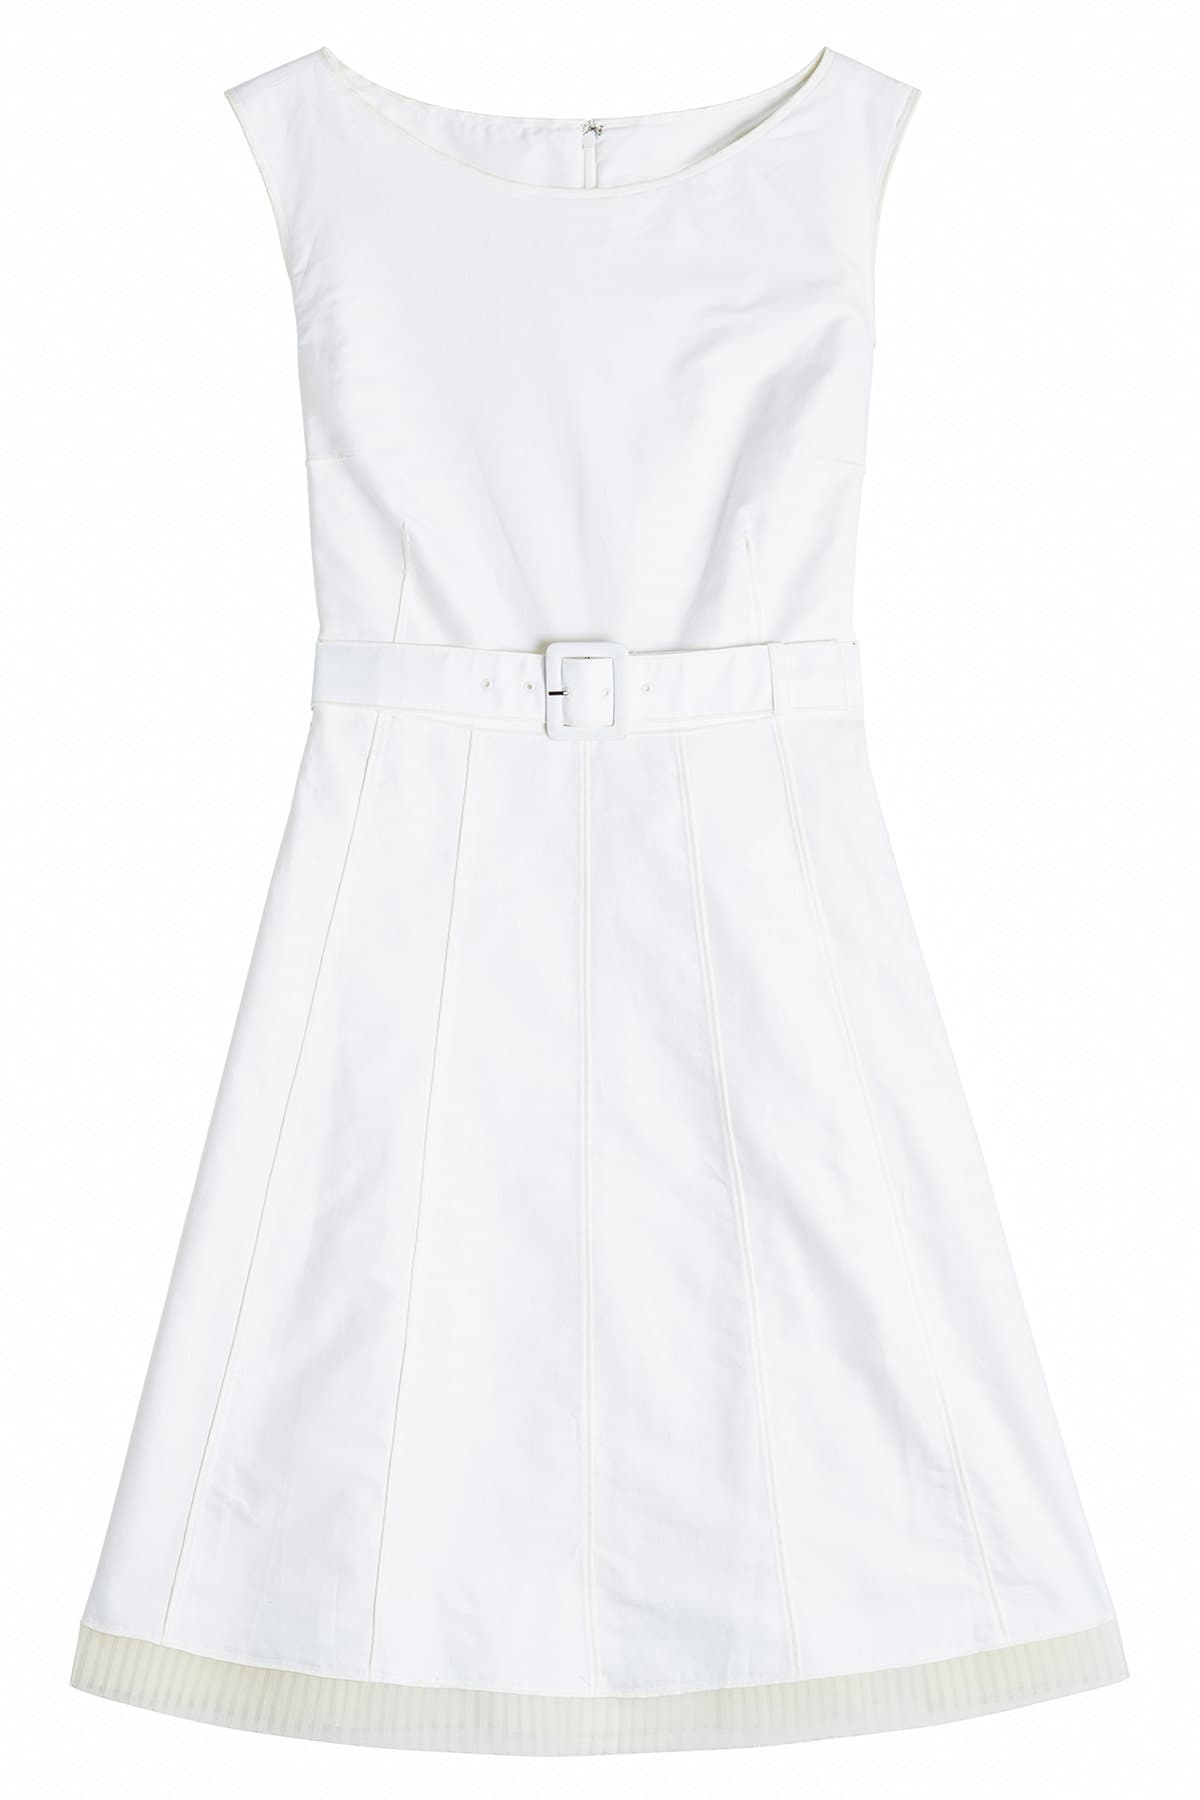 Marc Jacobs - A-Line Cotton Dress with Pleated Chiffon Trim